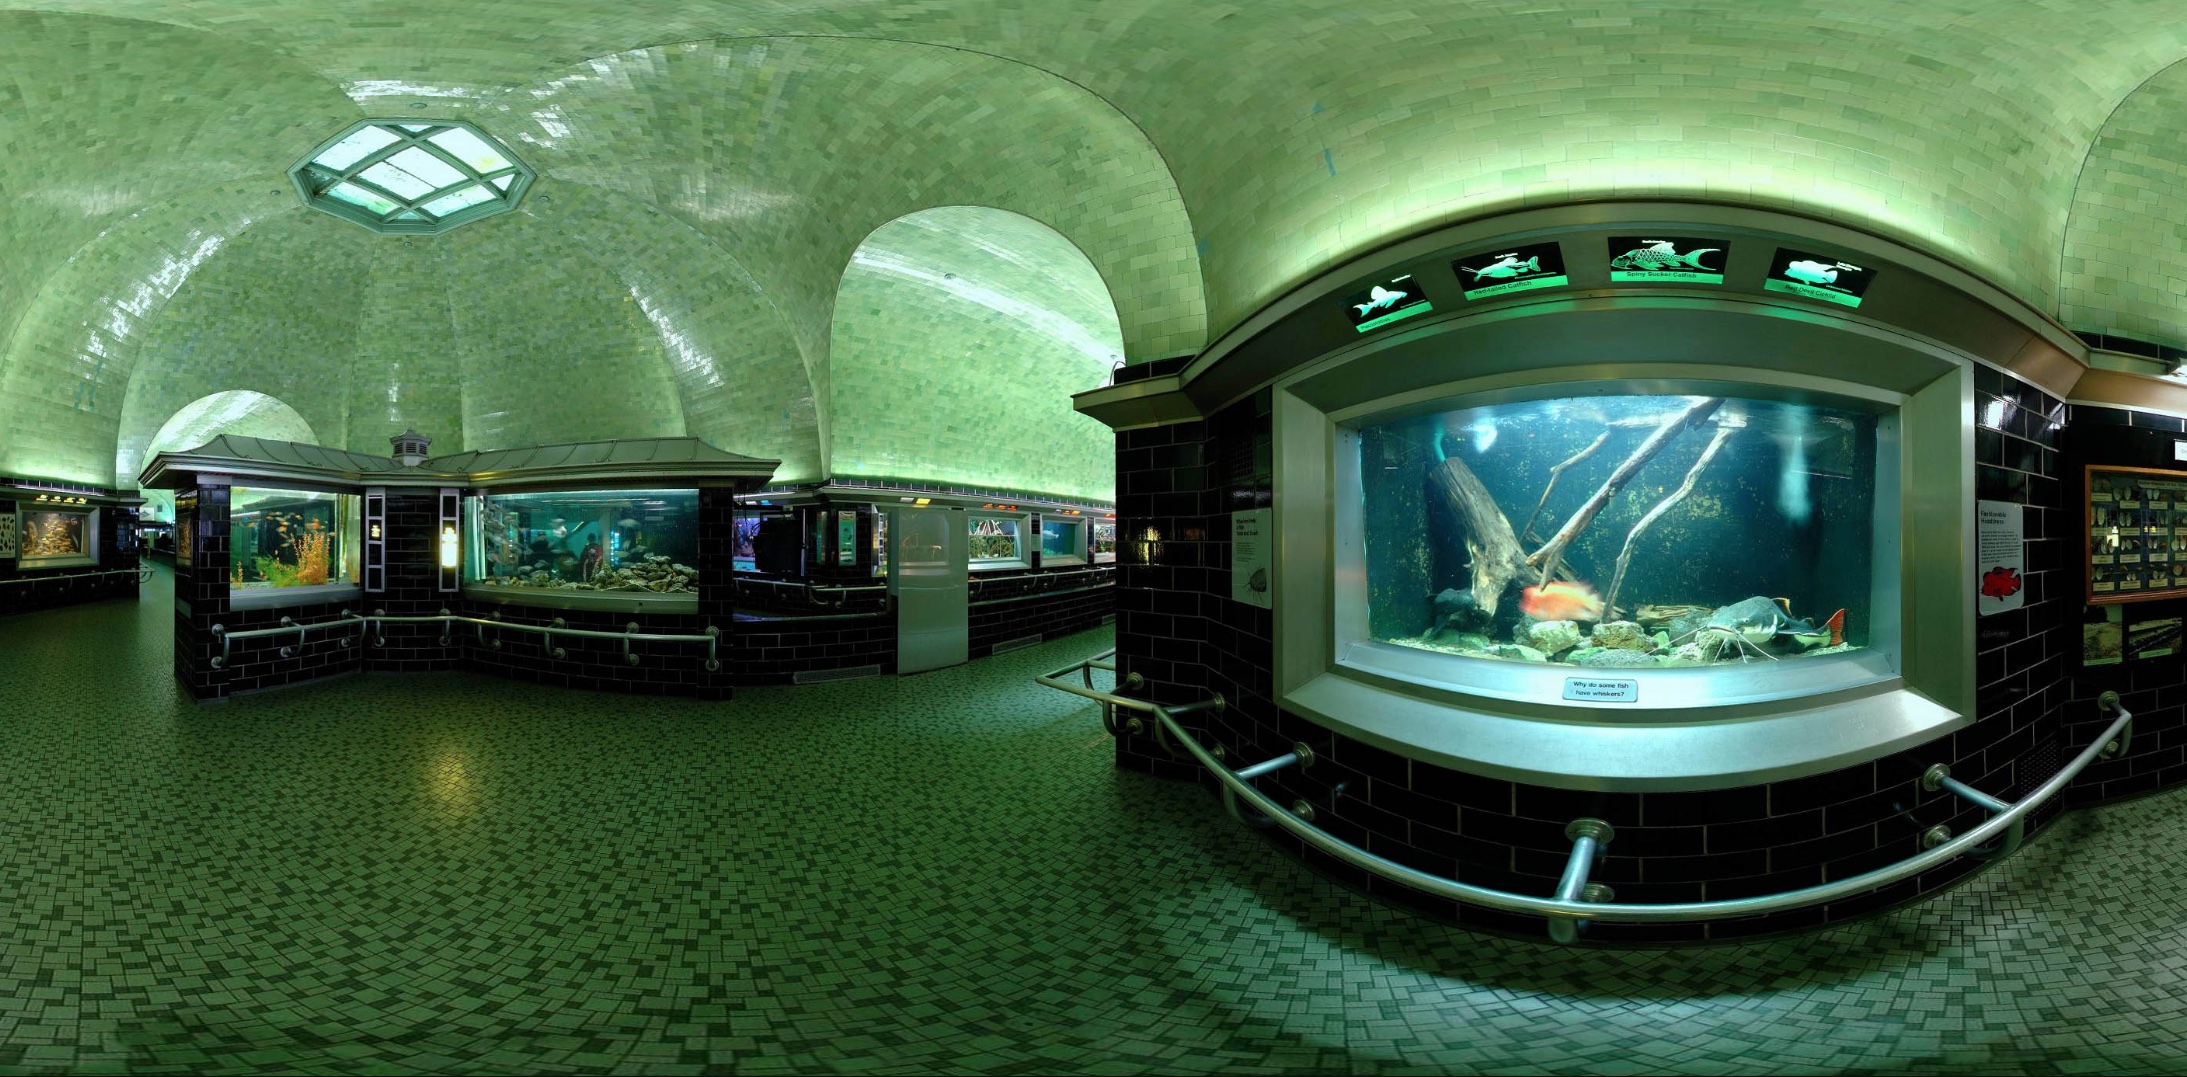 Belle Isle Aquarium in Detroit underwent extensive renovations in recent years. Photo by Jamie Wasilchenko courtesy AwesomeOcean.com